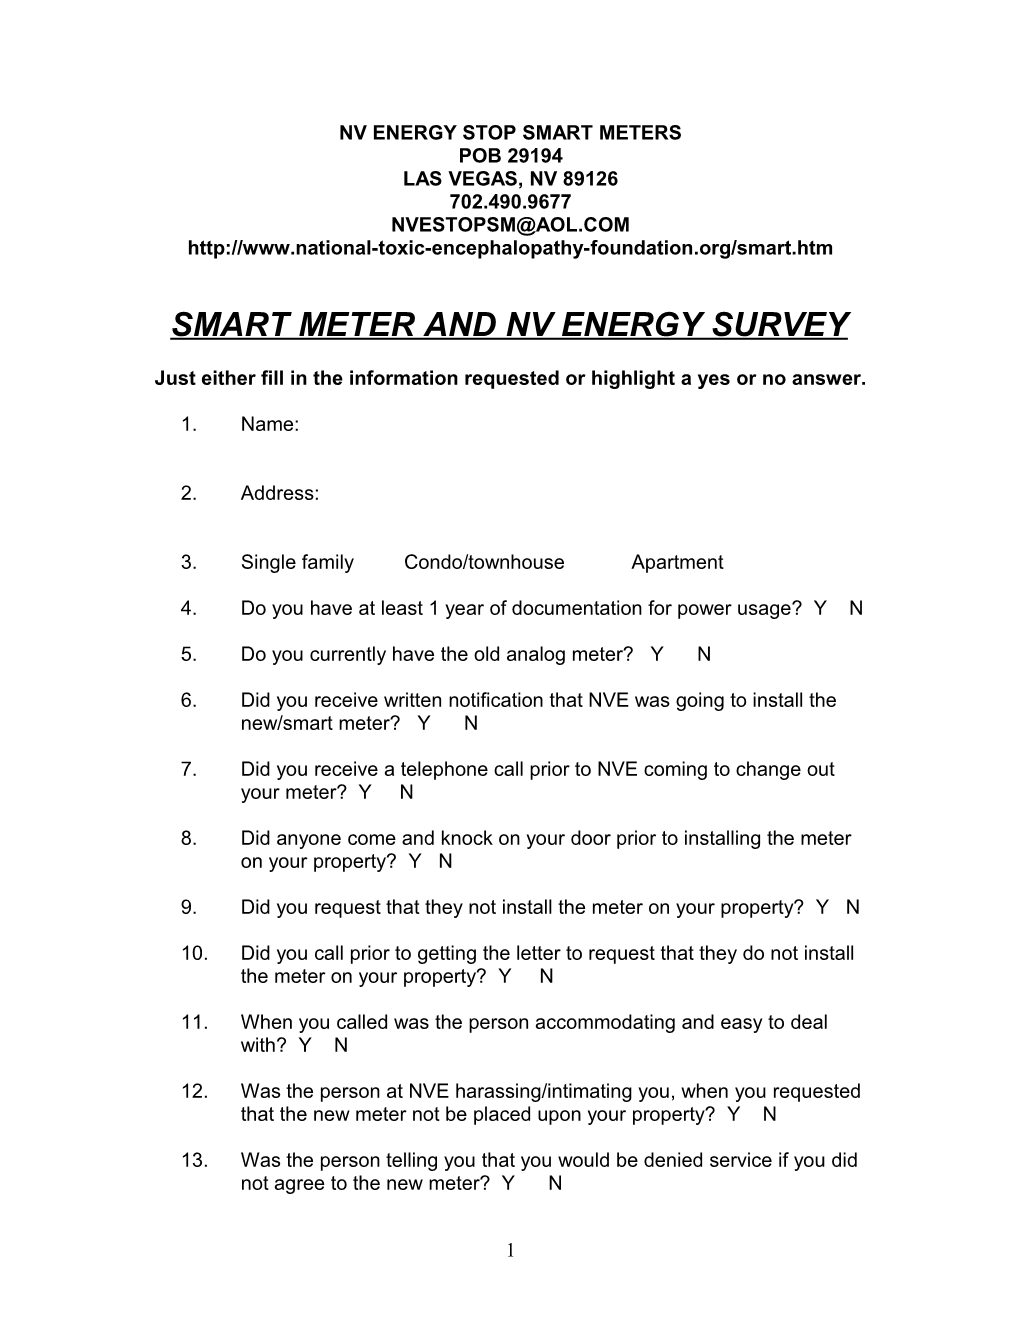 Smart Meter and Nv Energy Complaint Form